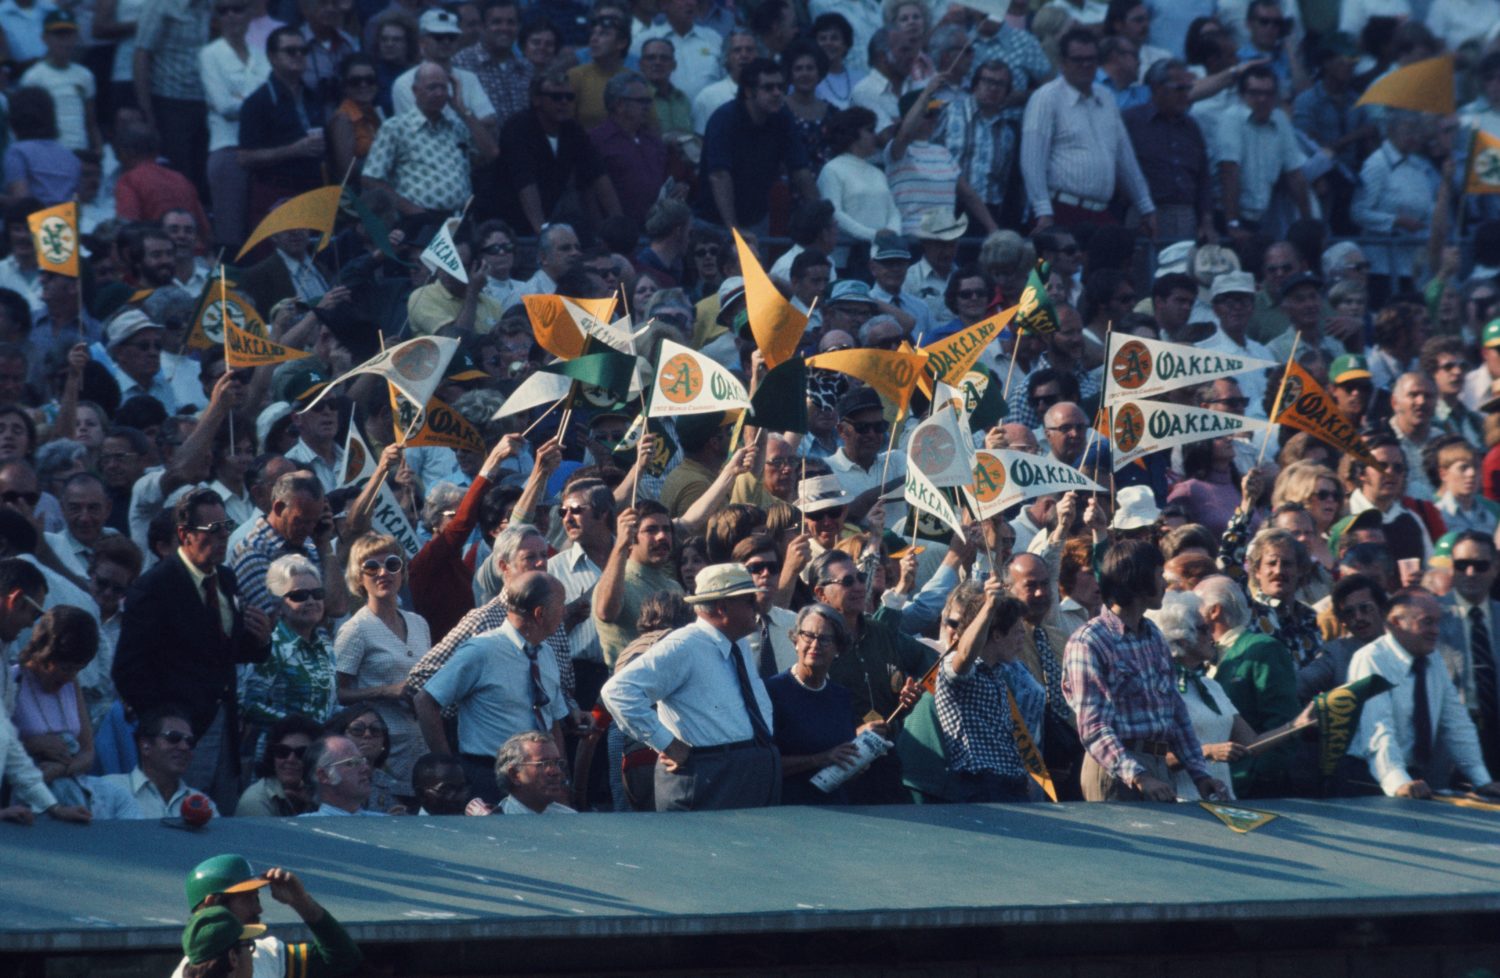 Oakland A's Fans Wave Pennants in 1973 World Series